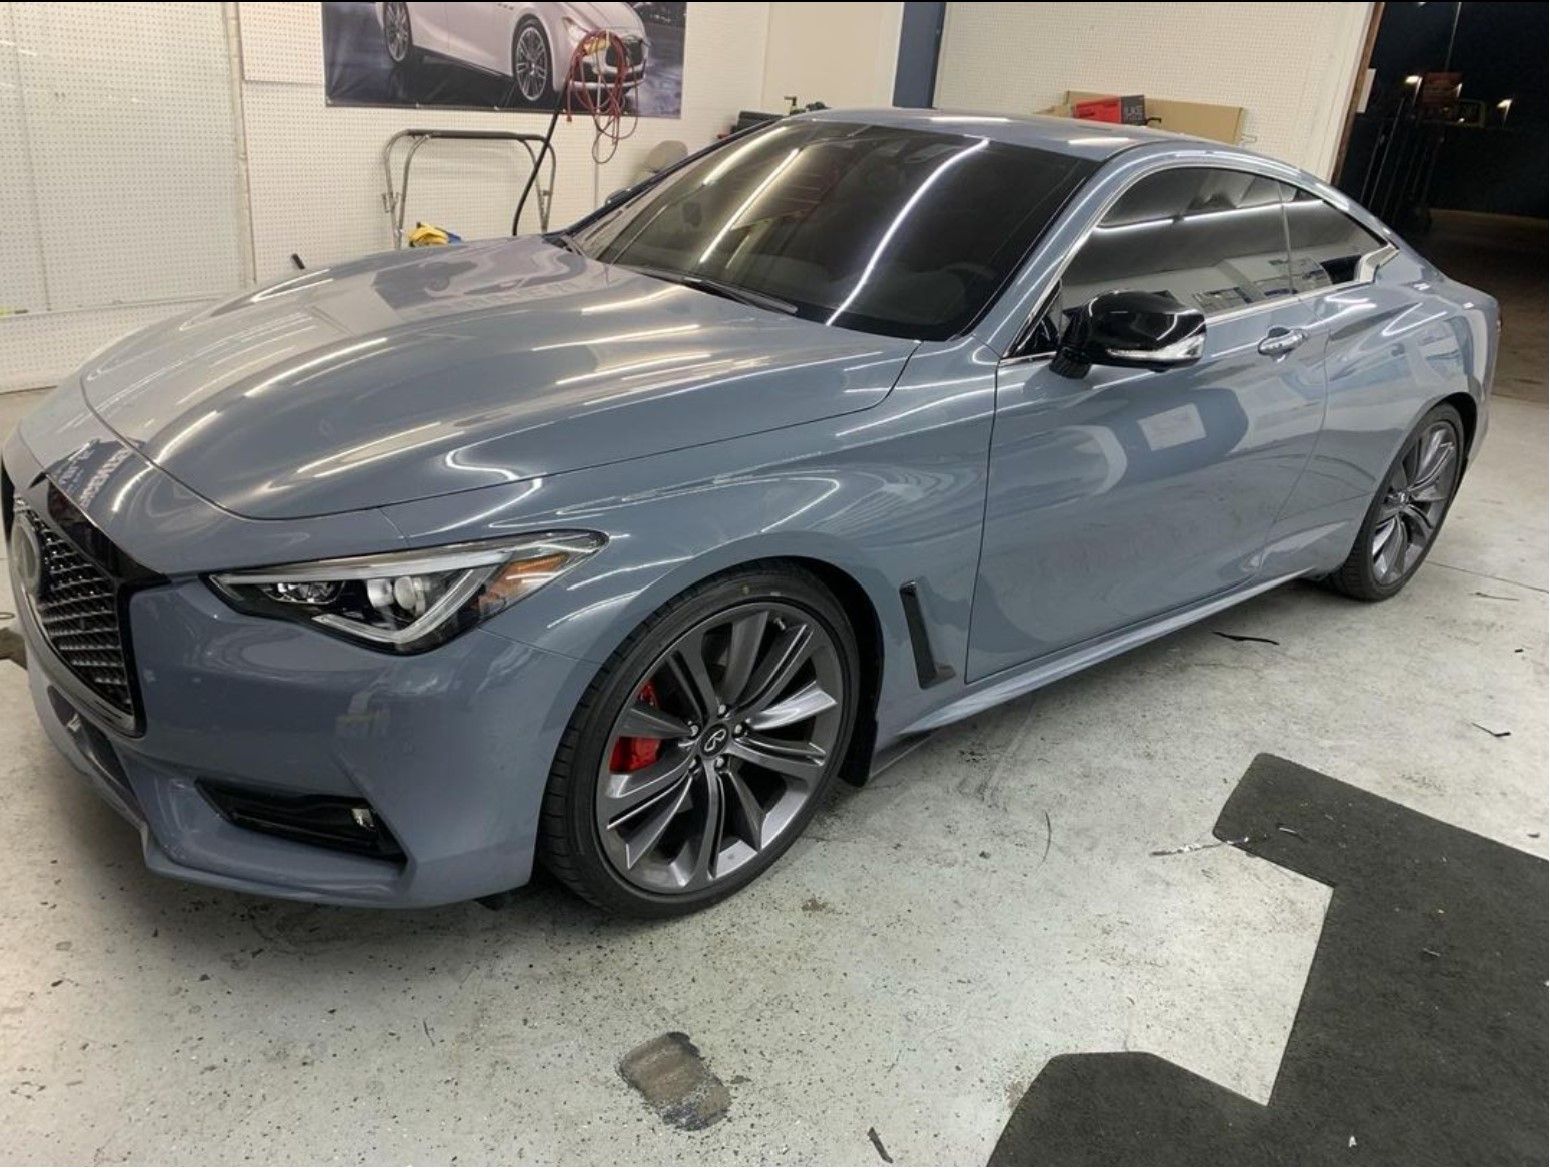 Window Tinted on a gray infinity q60 coupe